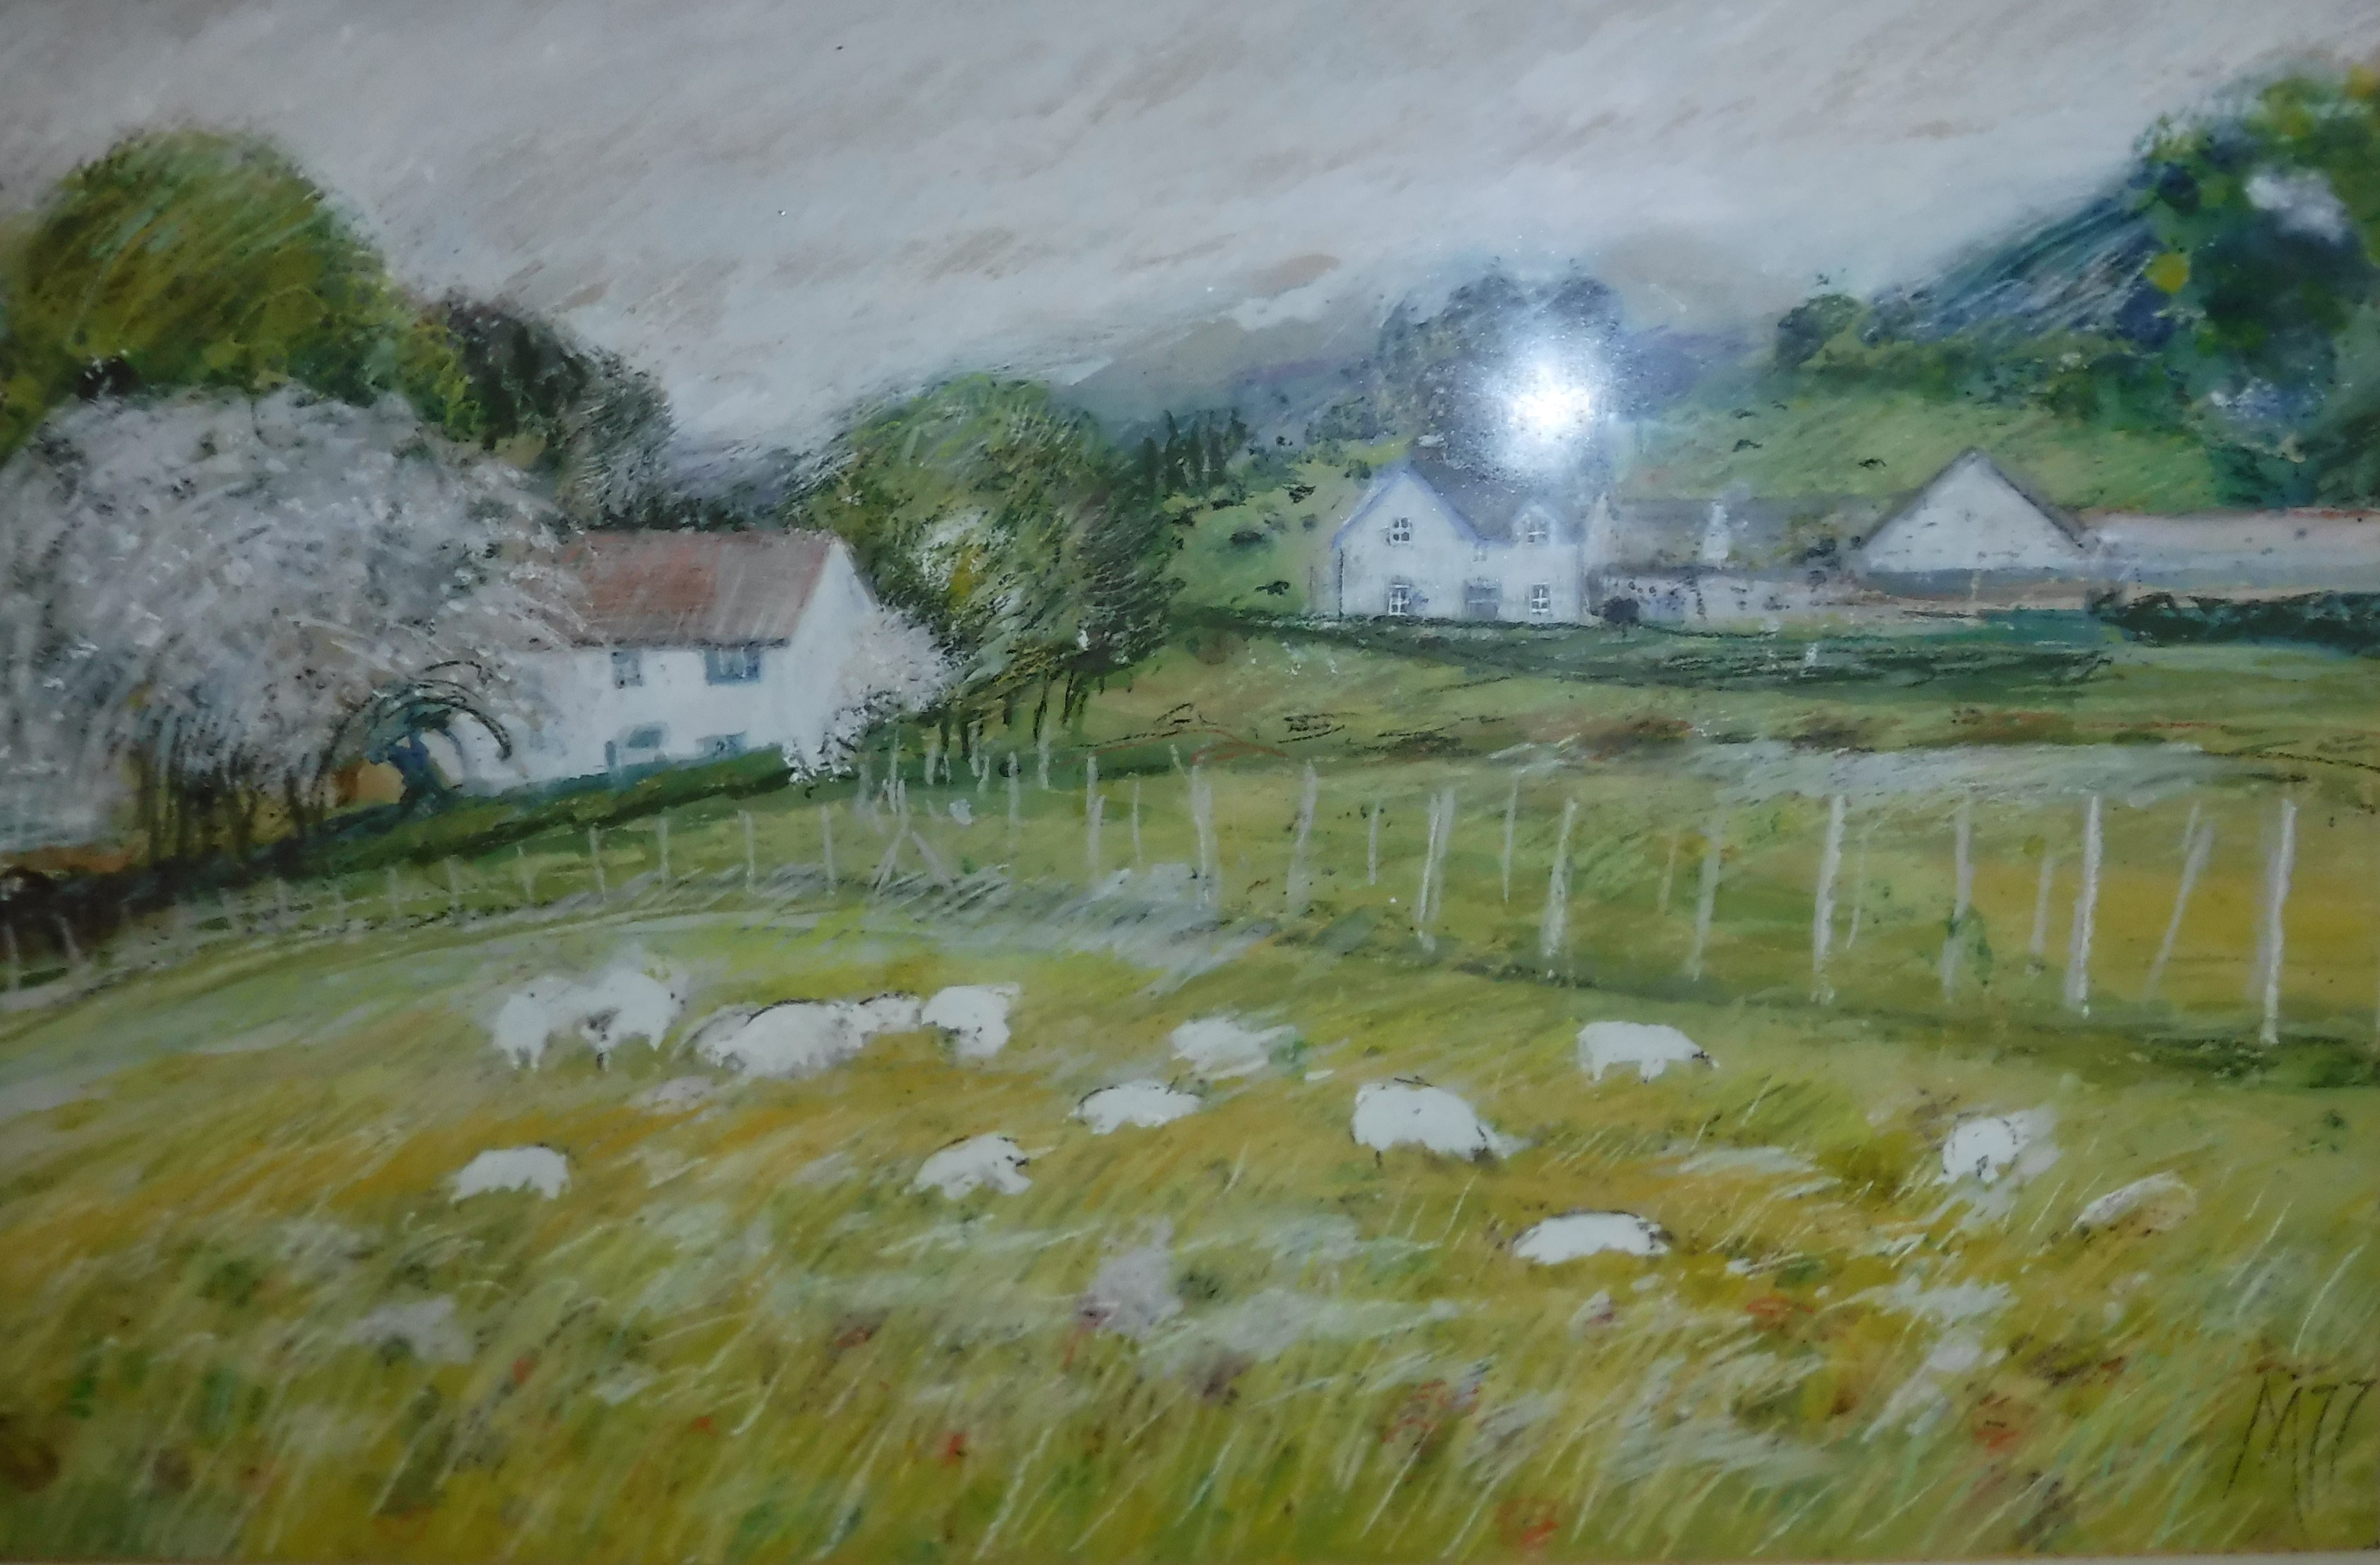 M "Sheep in field with whitewashed houses in the background", mixed media,